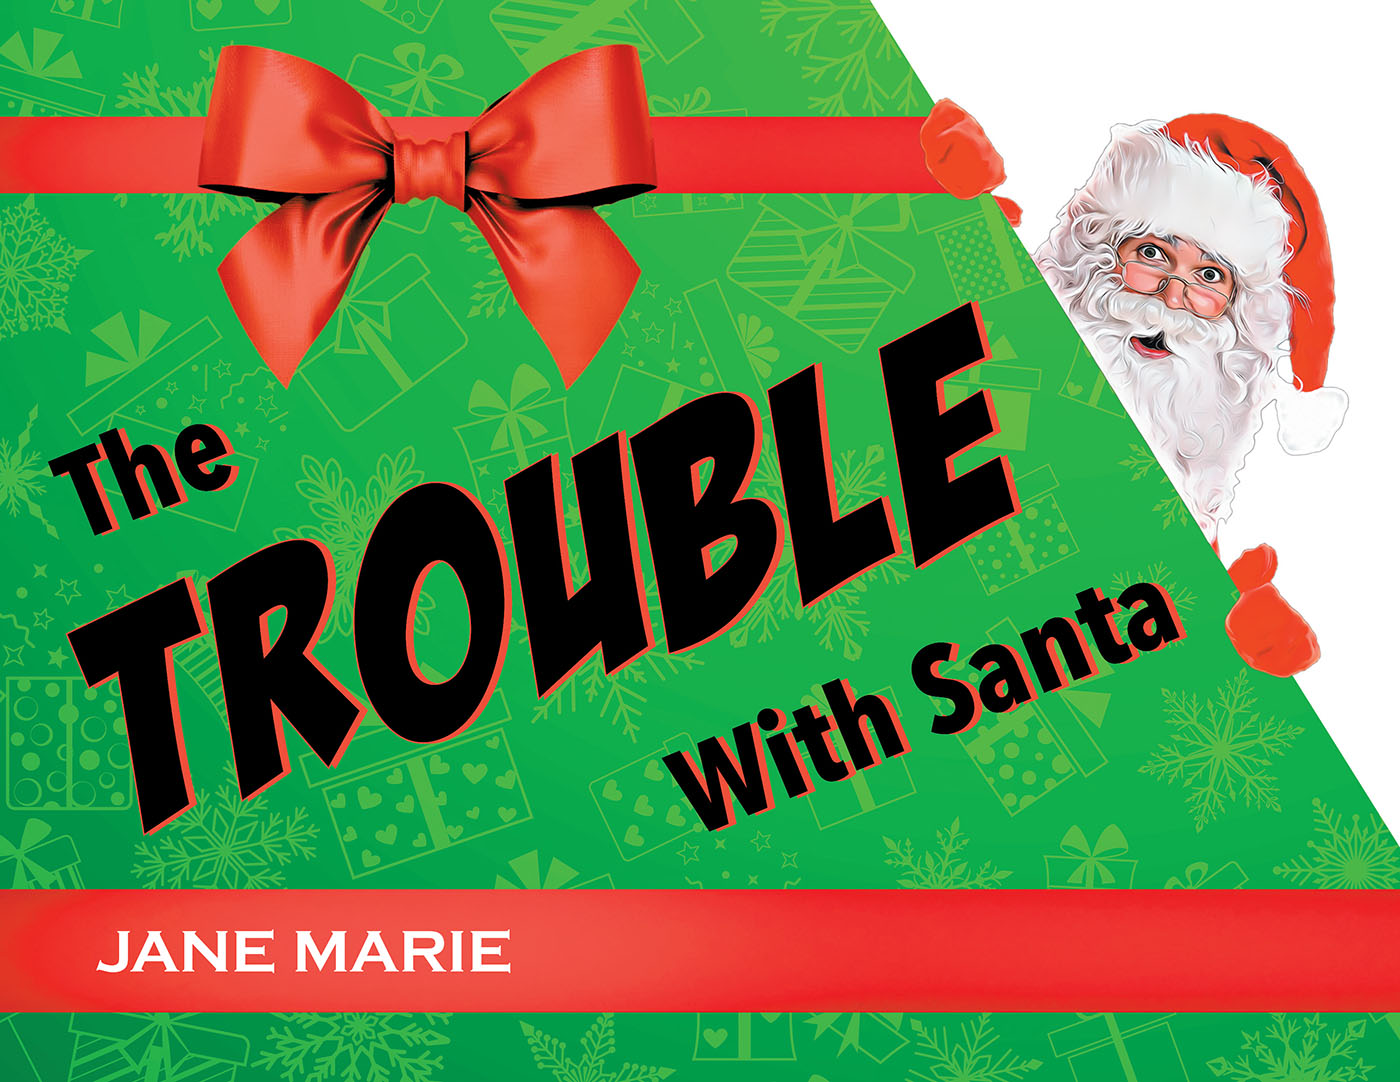 Jane Marie’s Newly Released "The Trouble With Santa" is a Charming Narrative That Helps Parents Balance the Fun of Santa with the True Reason for the Season